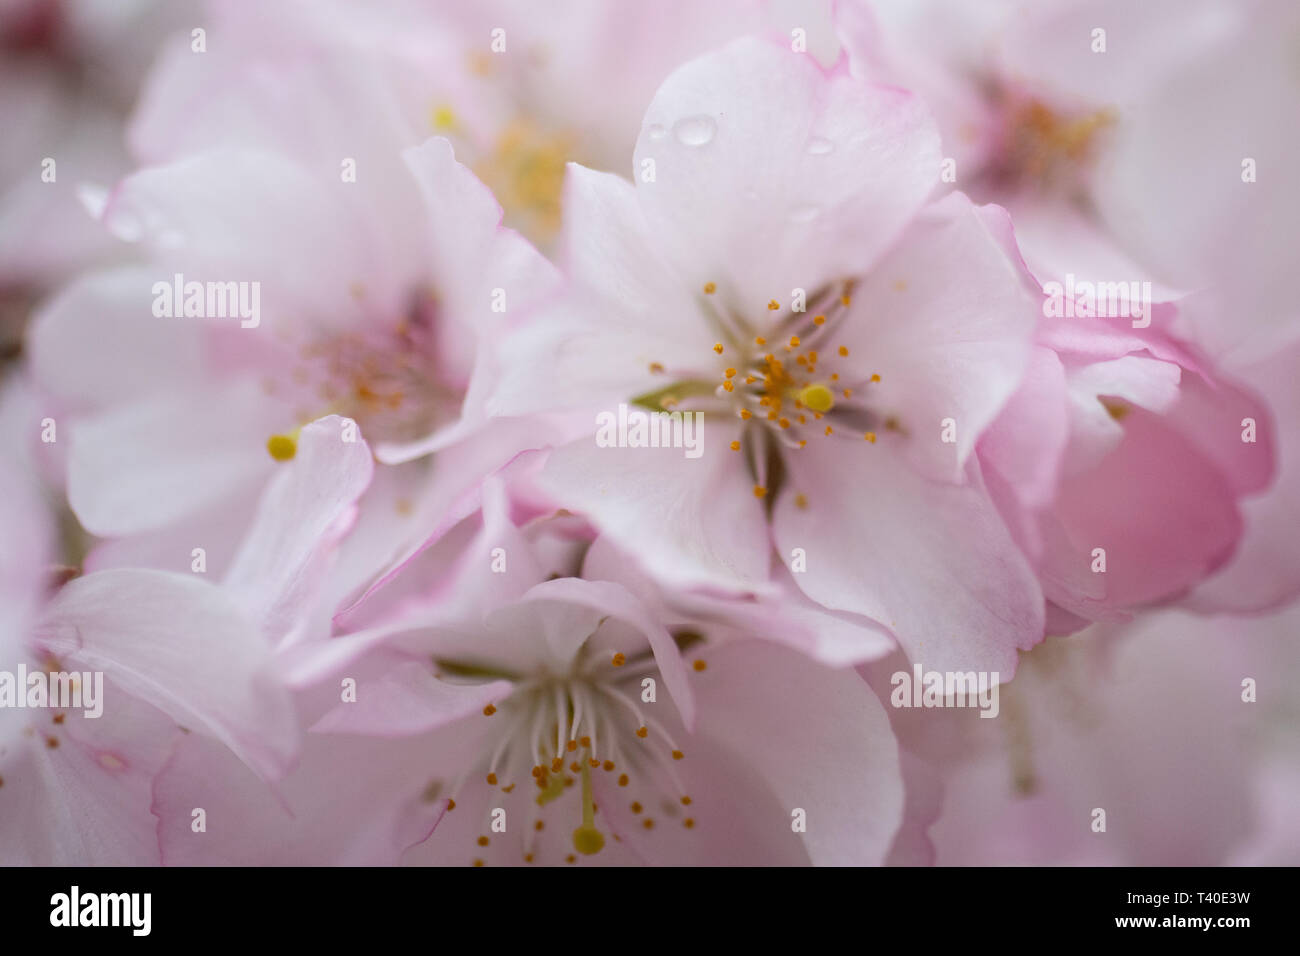 Cherry tree blossoms in spring - prunus rosaceae blossom closeup -flowering trees blooming with pink and white flowers - cherry tree blossom close up Stock Photo